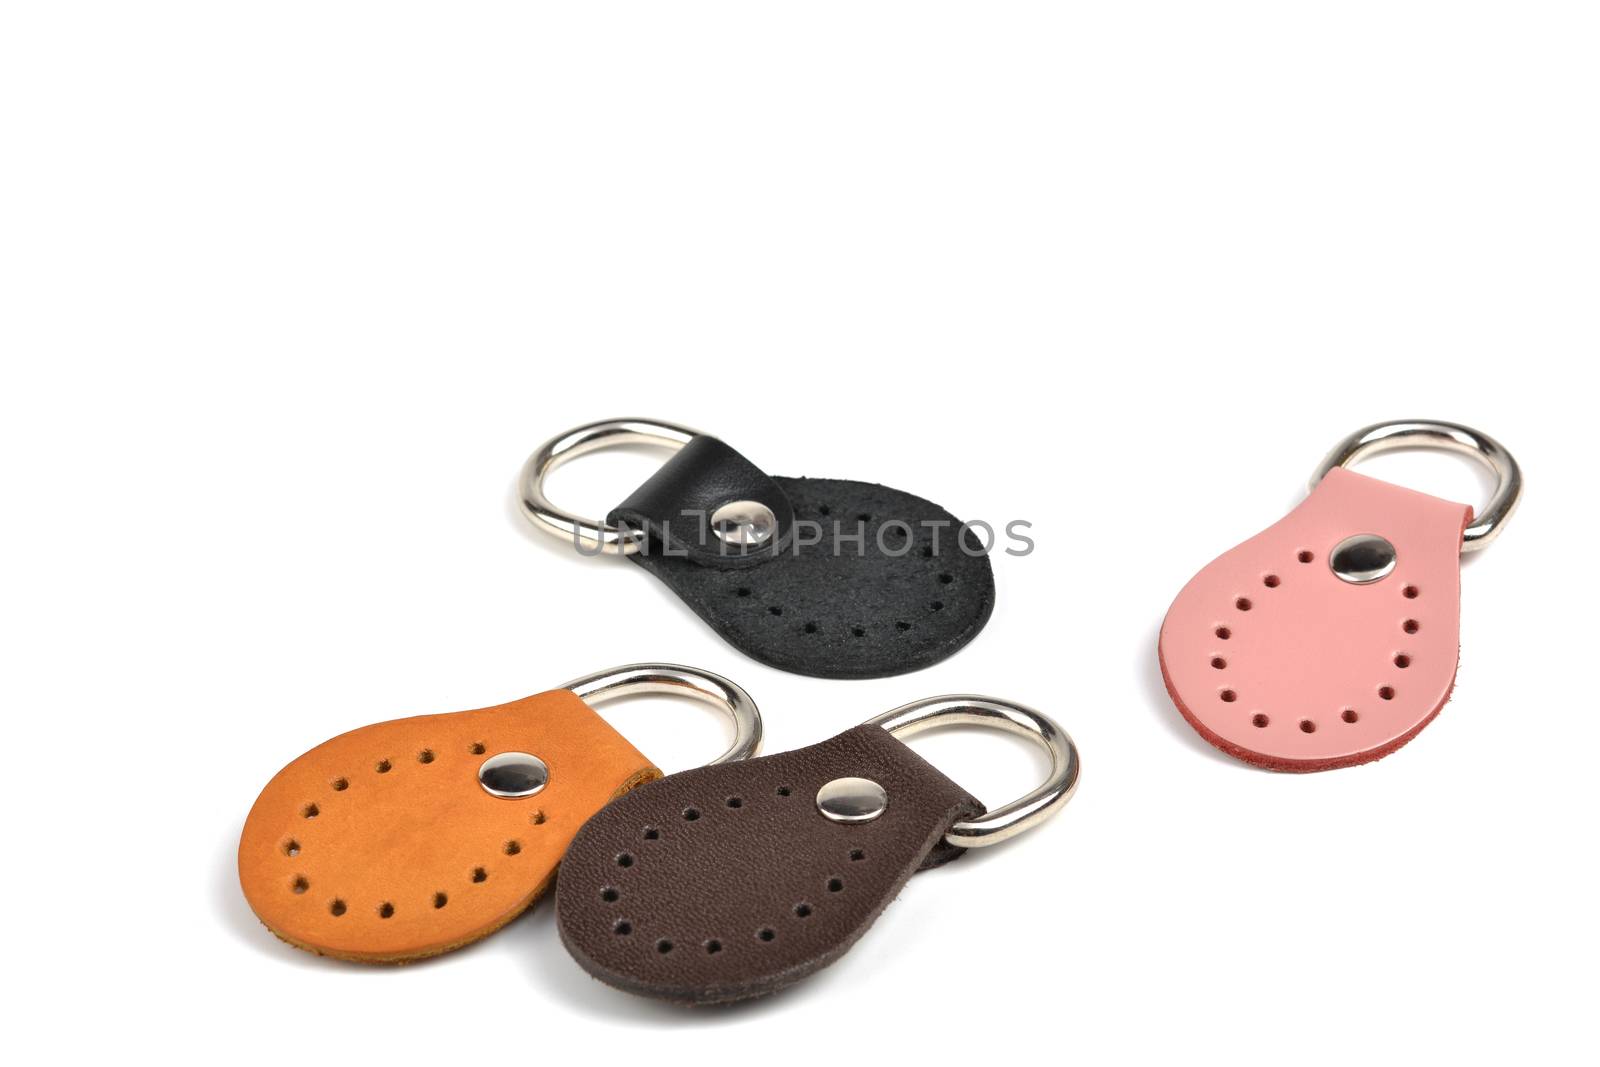 Blank round orange, black, pink, brown leather key chain collection on isolated white background with clipping path. Color set of metallic souvenir.